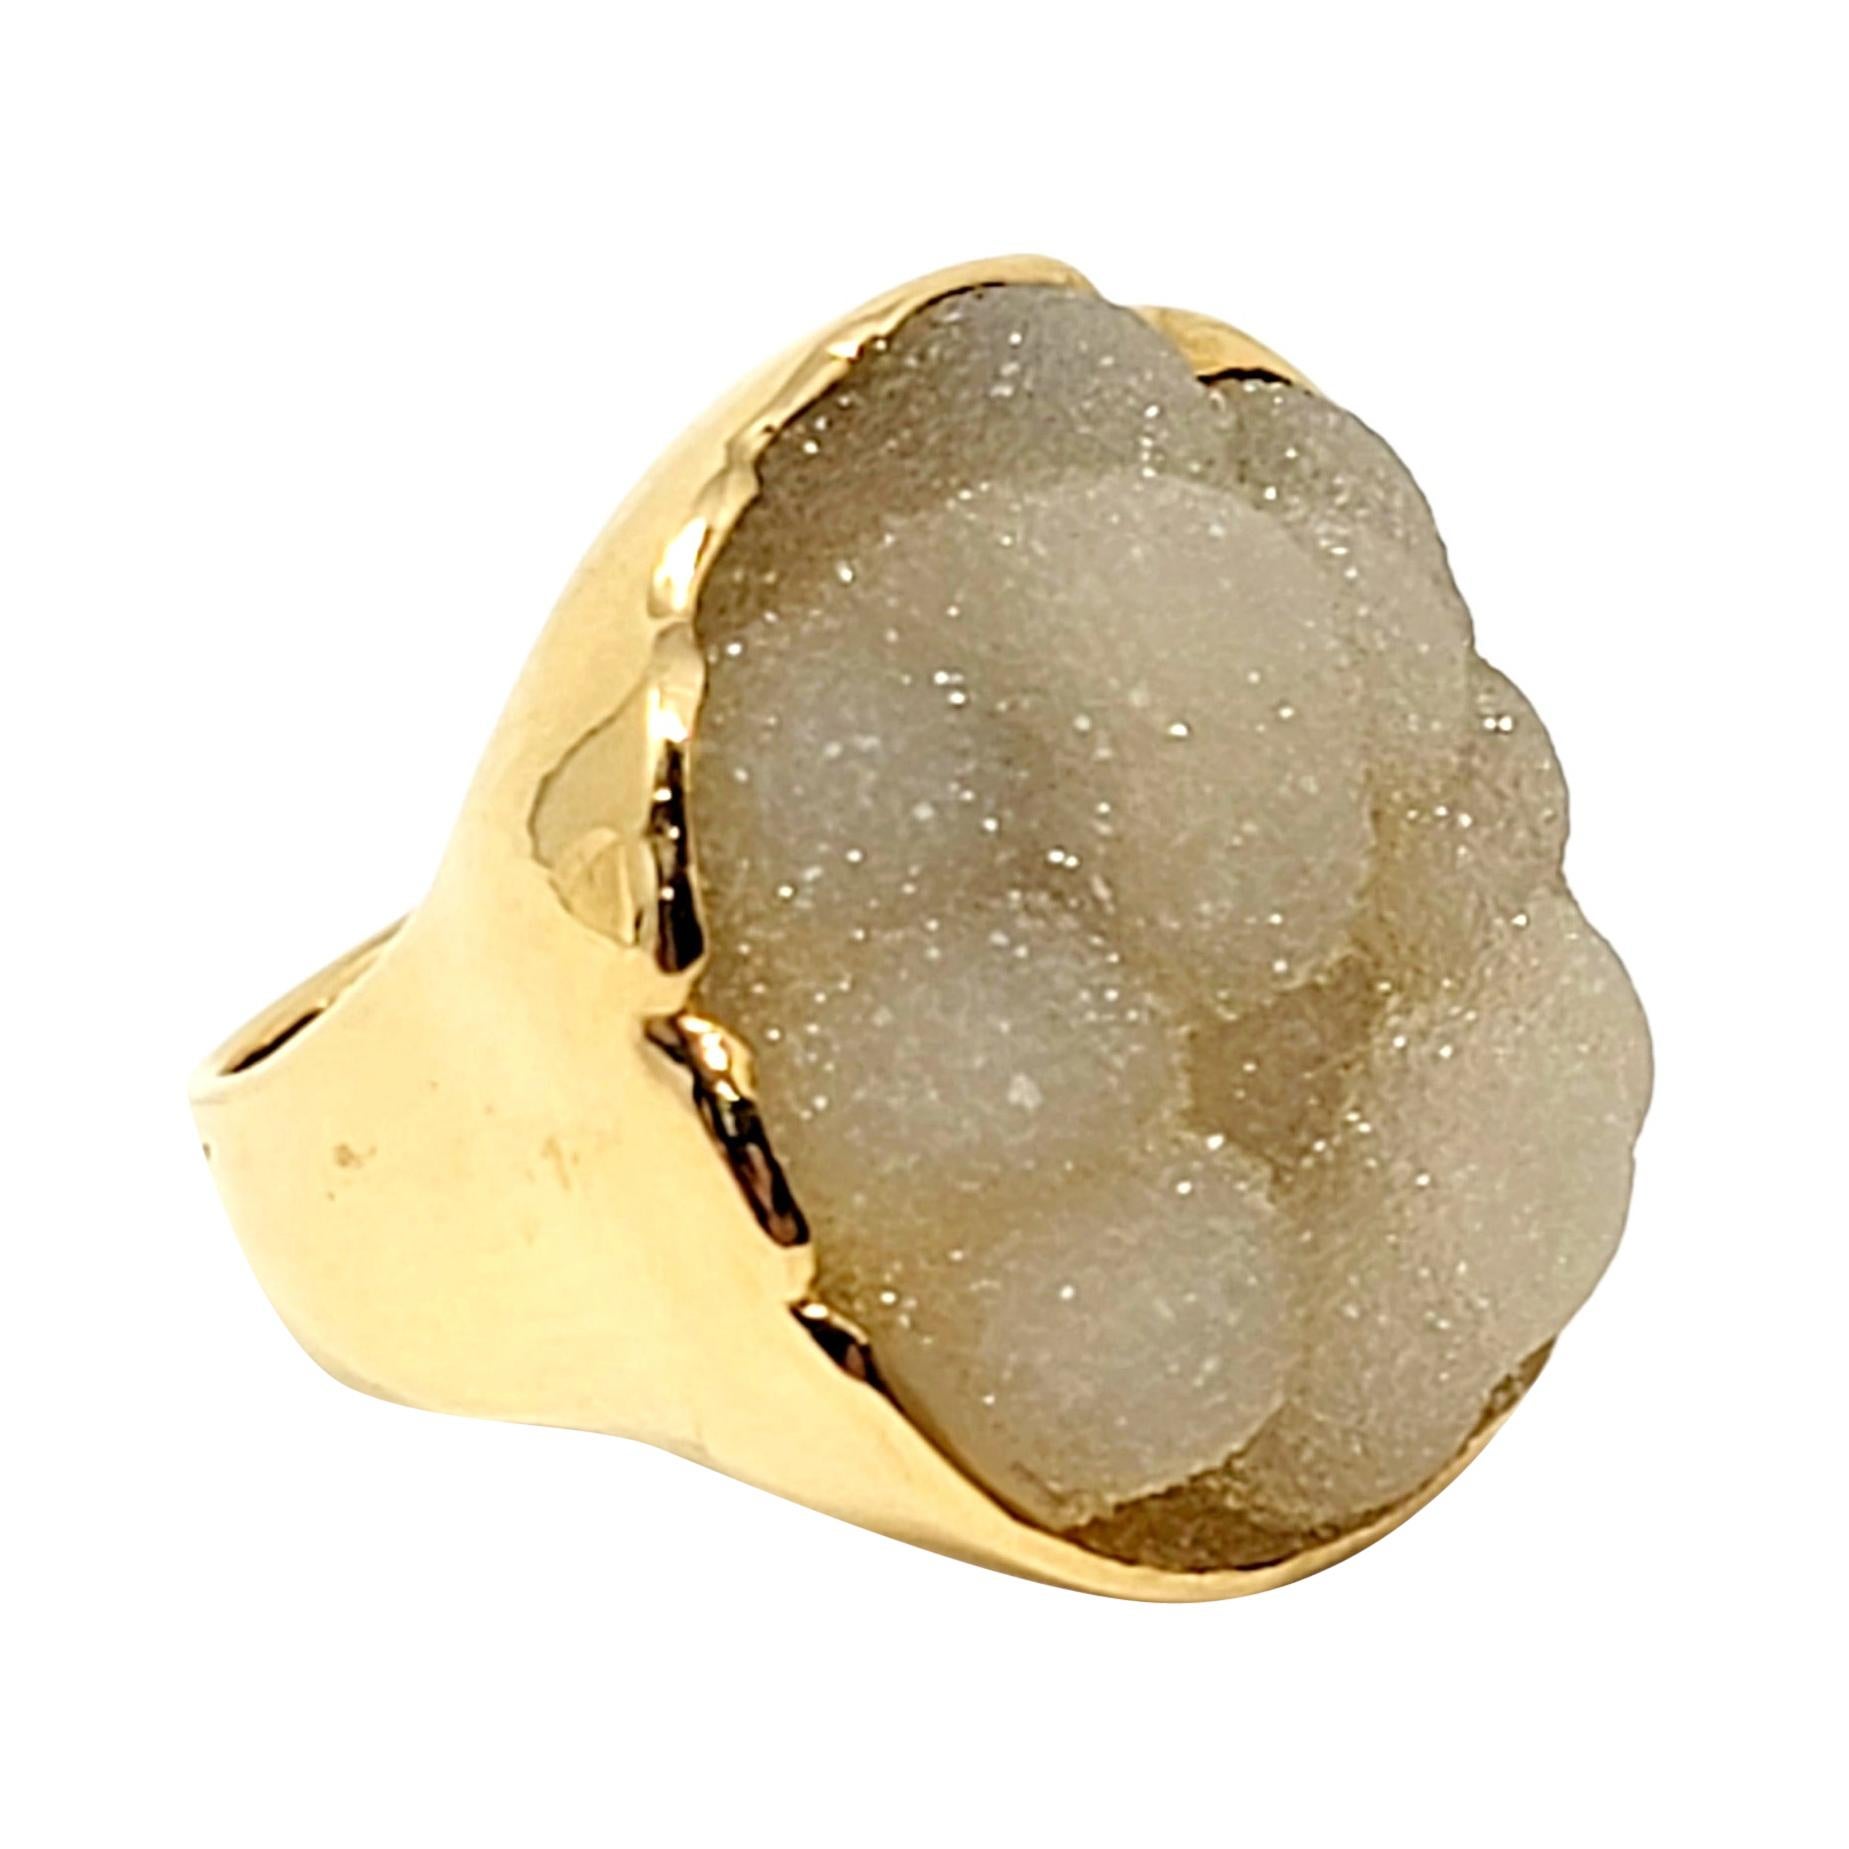 Rough Cut Opaque Gray Botryoidal Agate Cocktail Ring 18 Karat Yellow Gold 6.75